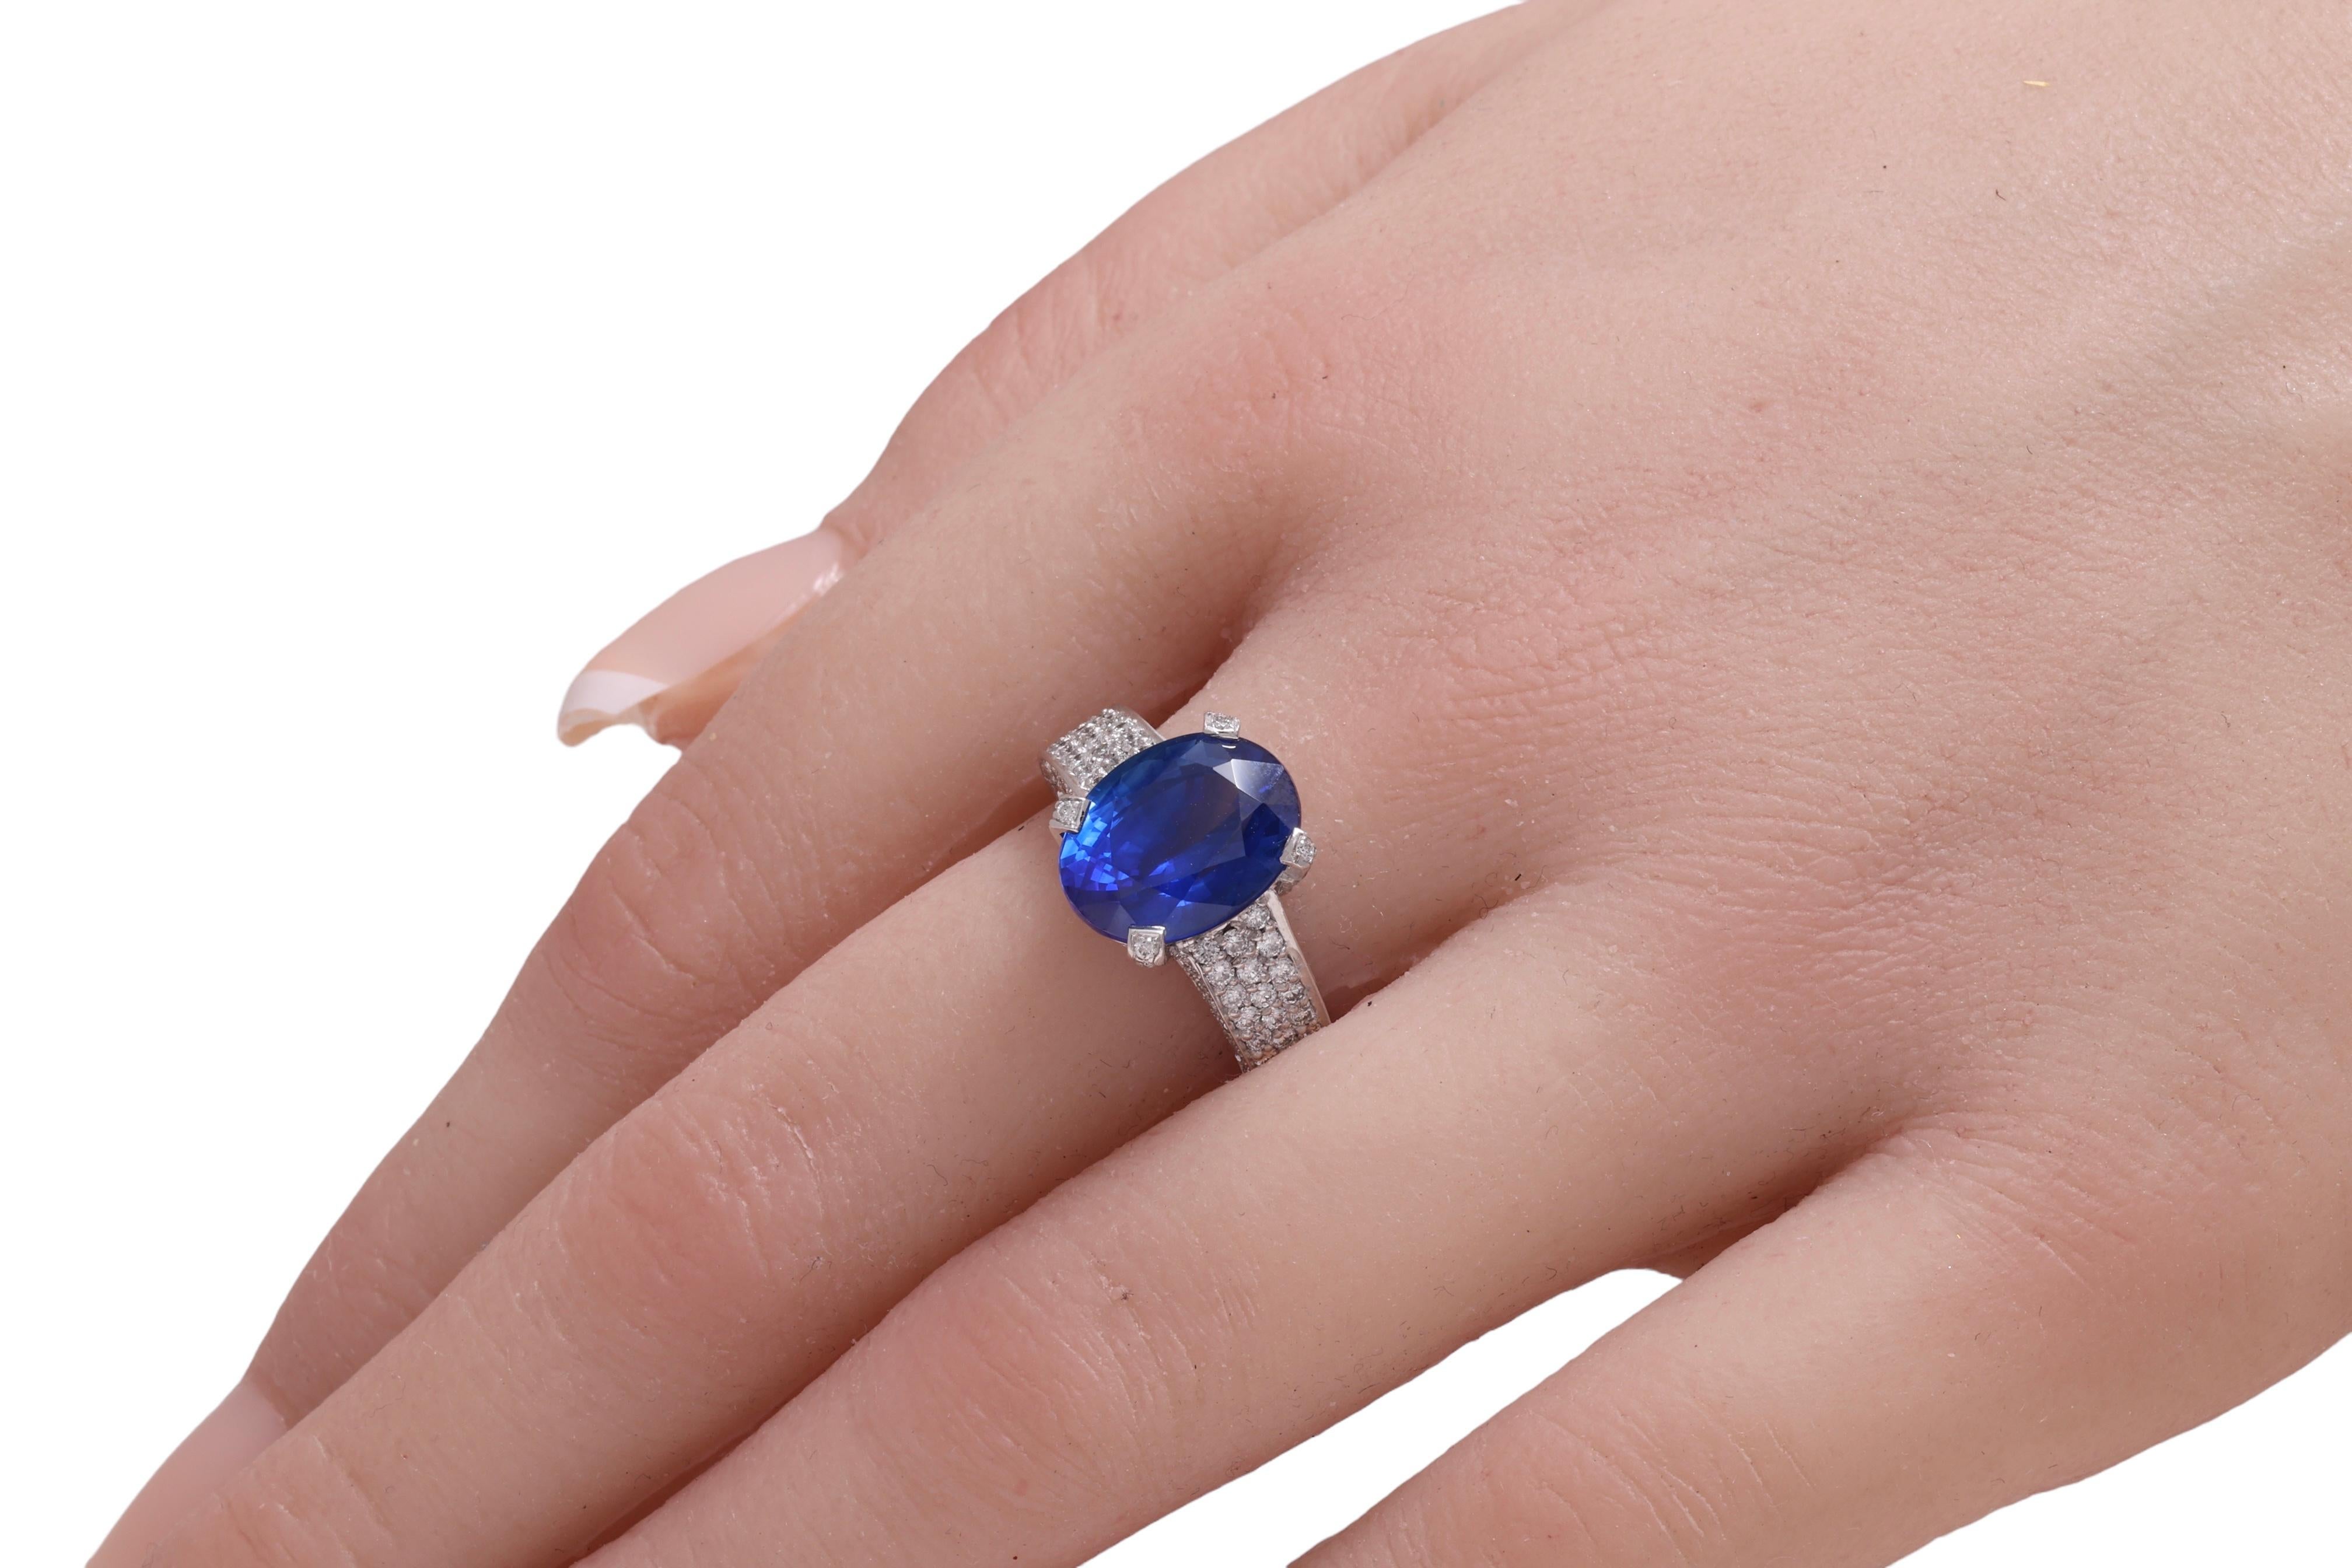  AGL Certified 18kt. White Gold Ring 6.32 ct. Ceylon Sapphire &1.62 ct. Diamonds For Sale 2